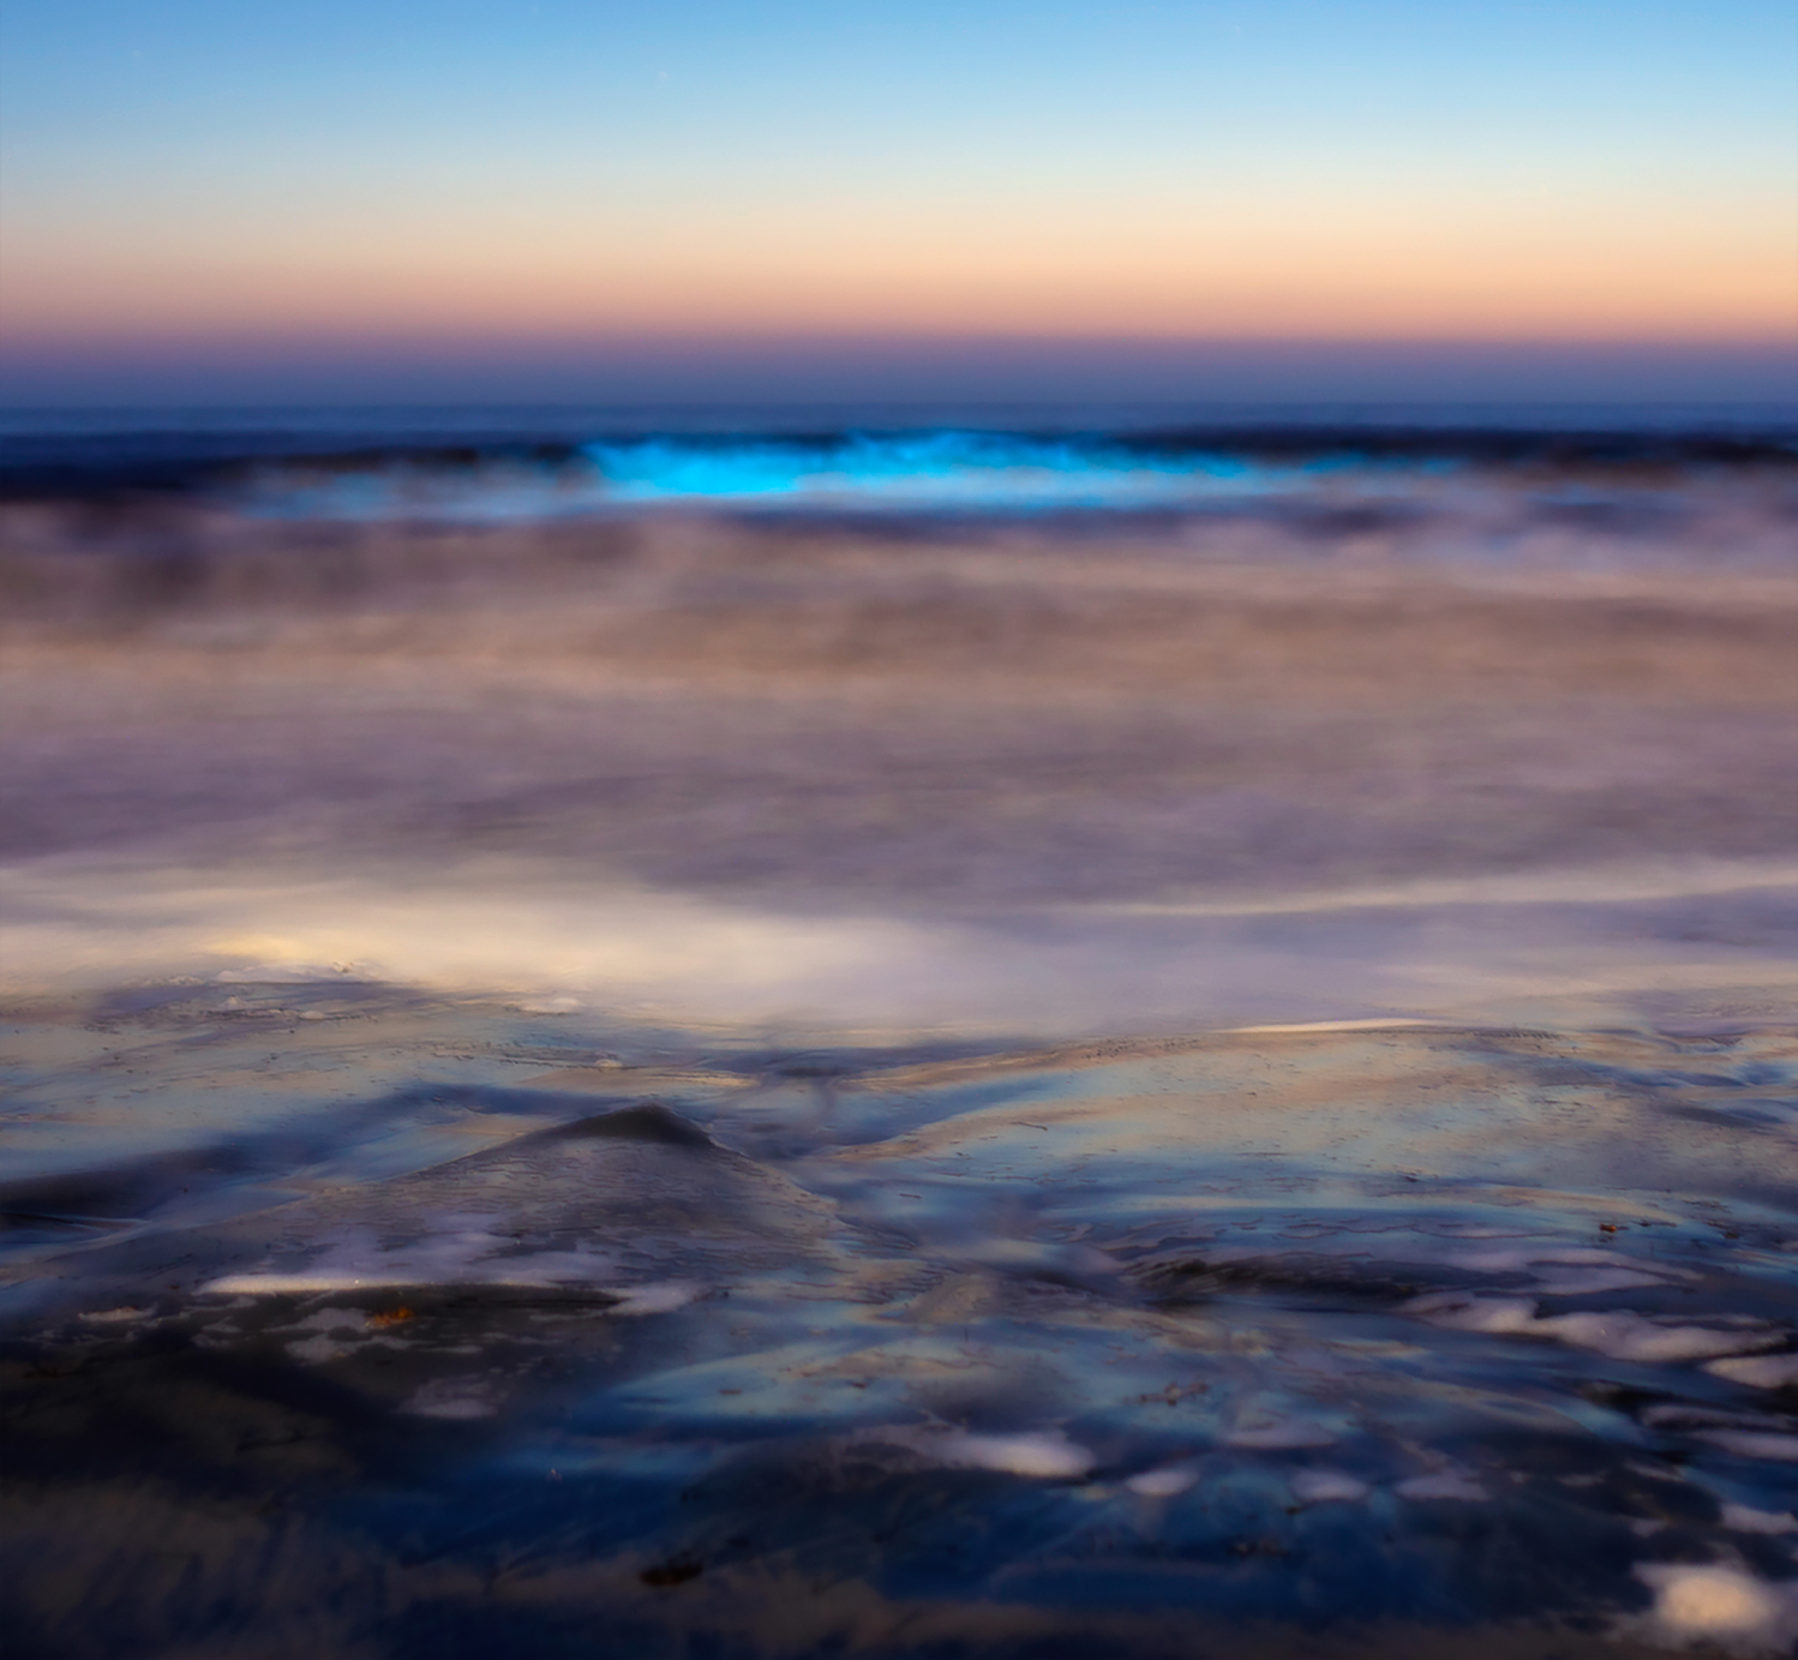 A photo illustration conjures the nebulous feel of the red tide phenomenon. Photo: Rachel Blaser.